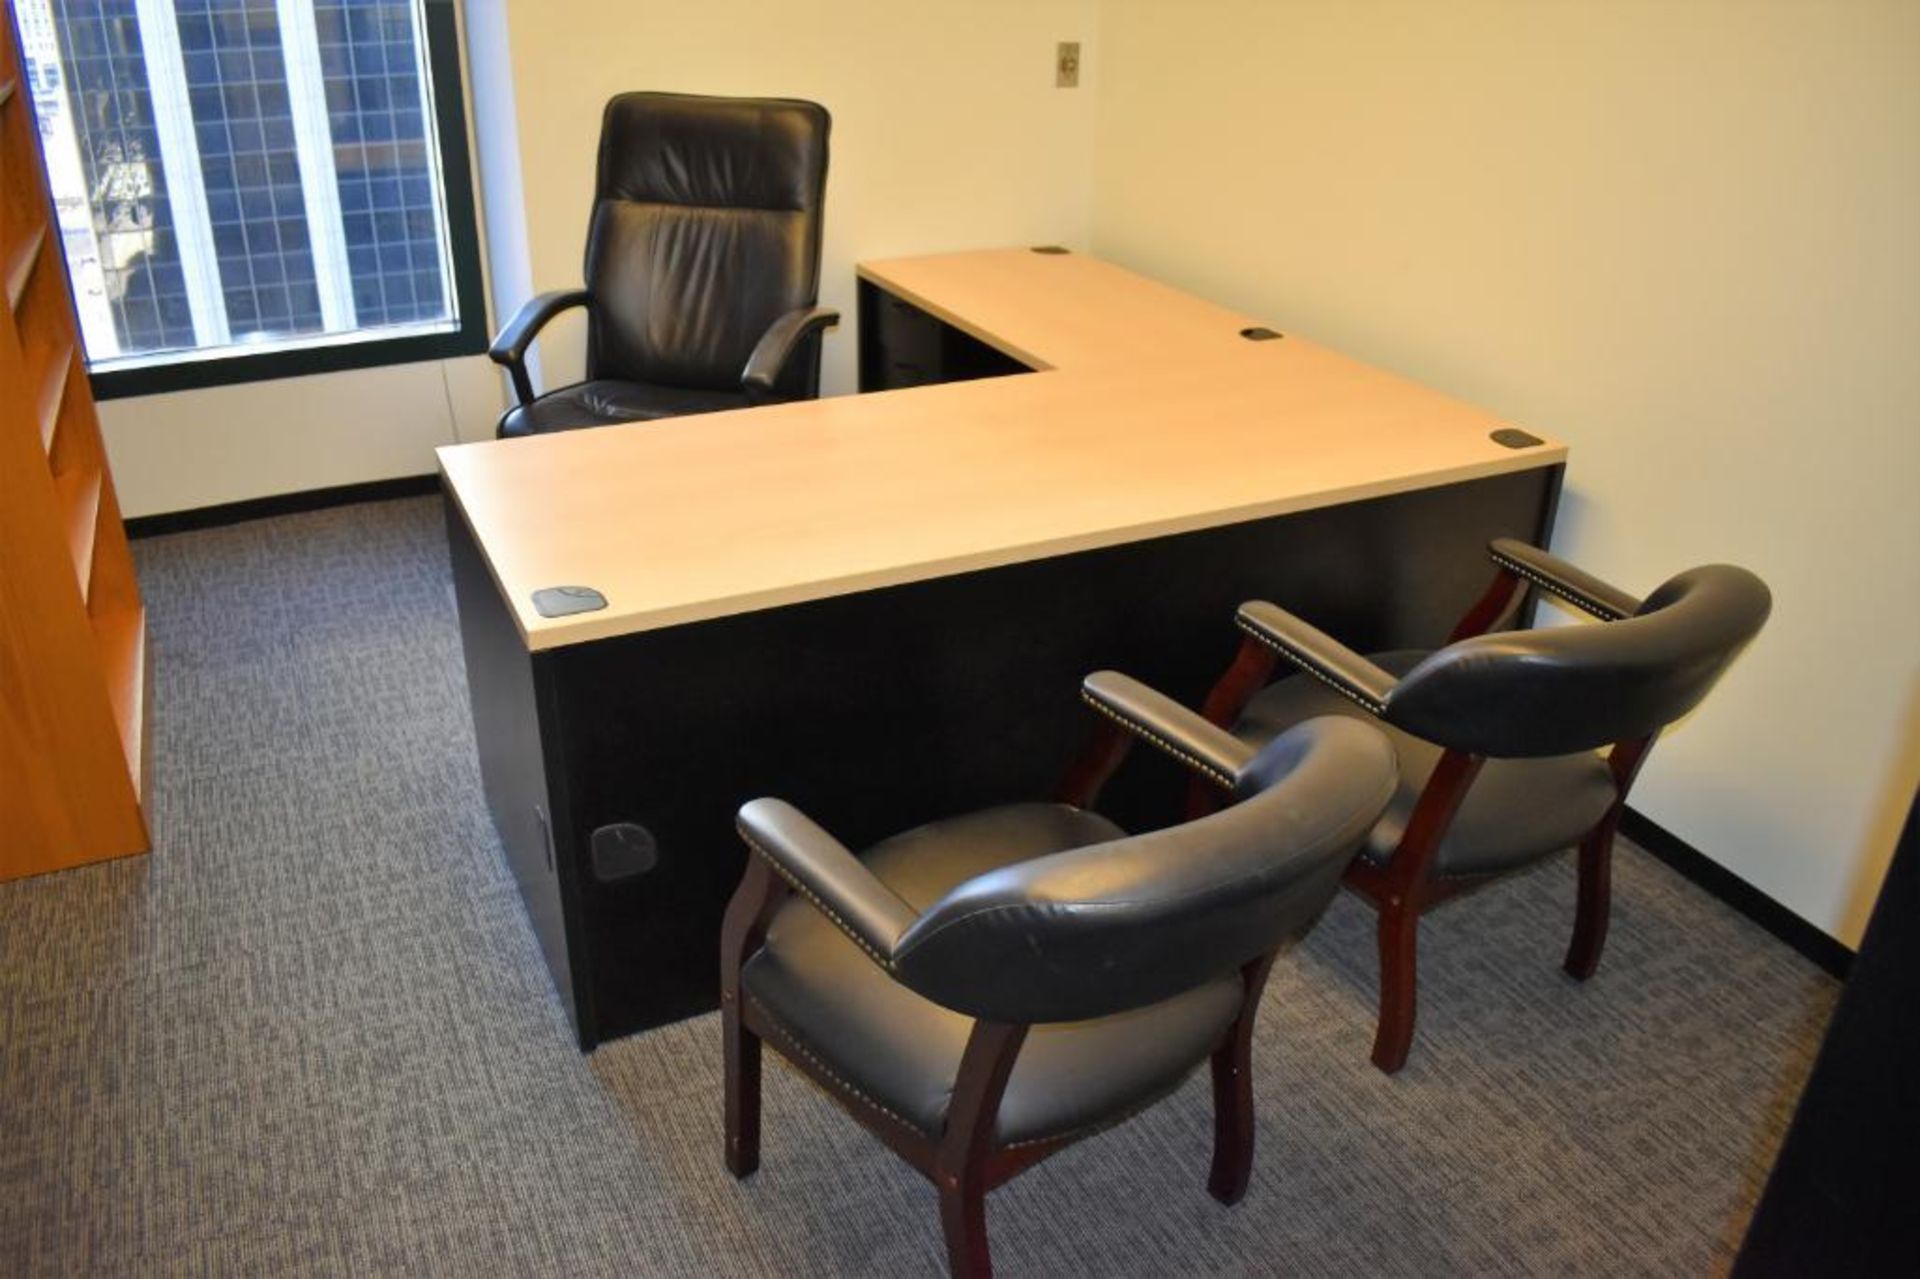 Office Suite c/o: Wood Laminate Work Table w/Left Return, Plastic Frame Leather Upholstered High Bac